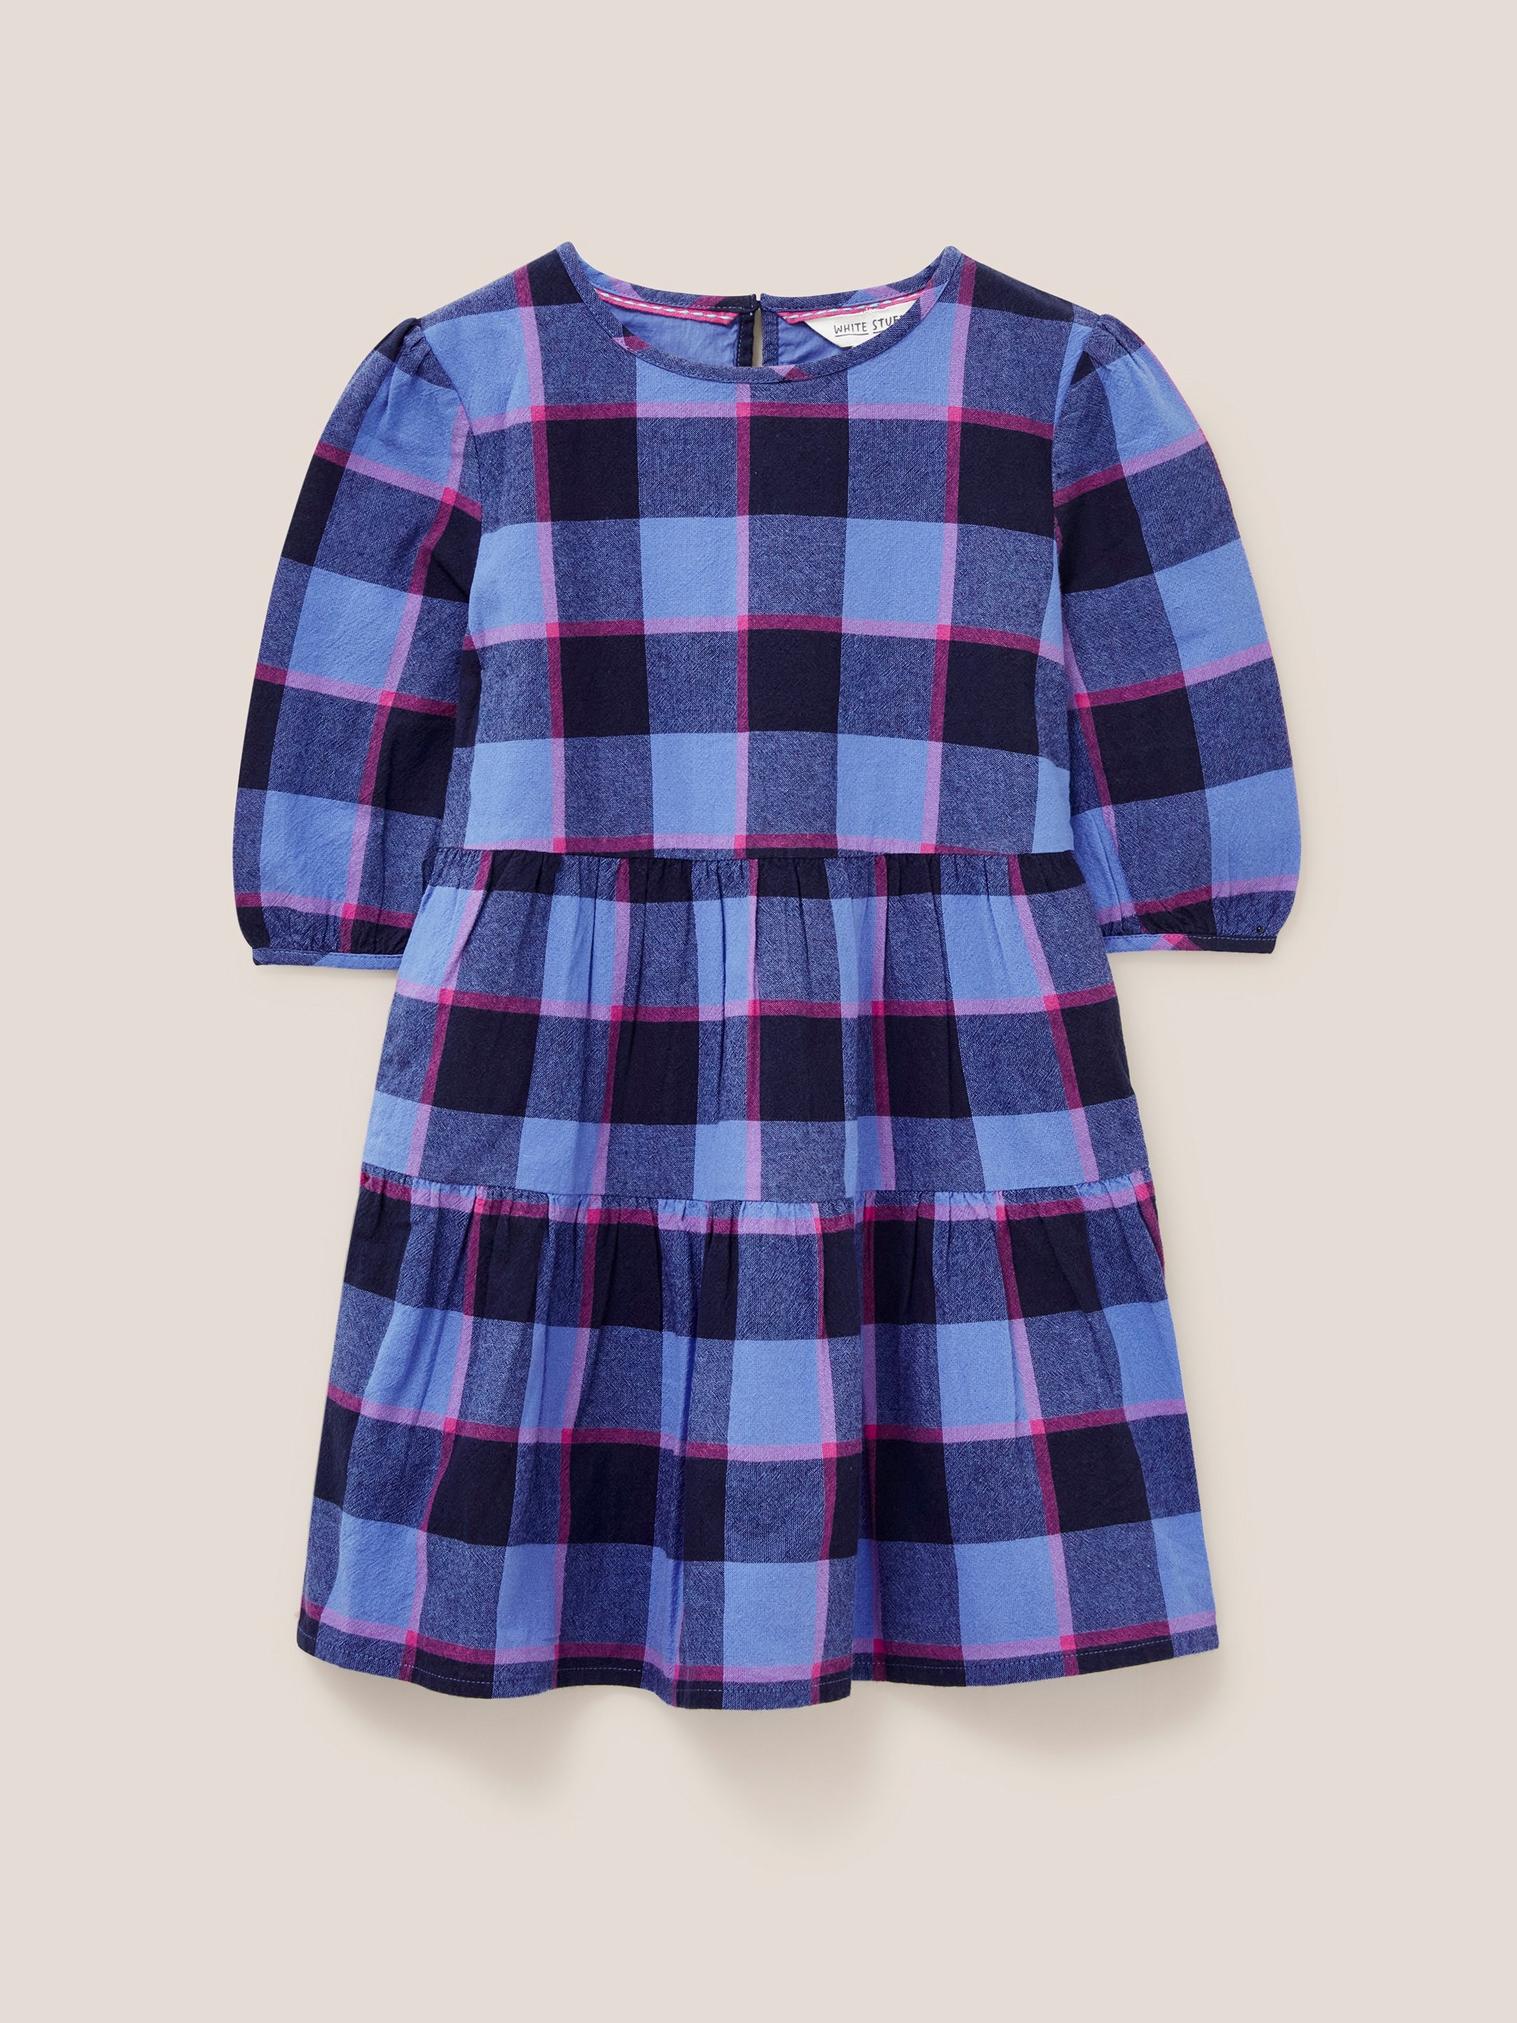 Chloe Check Dress in BLUE MLT - FLAT FRONT